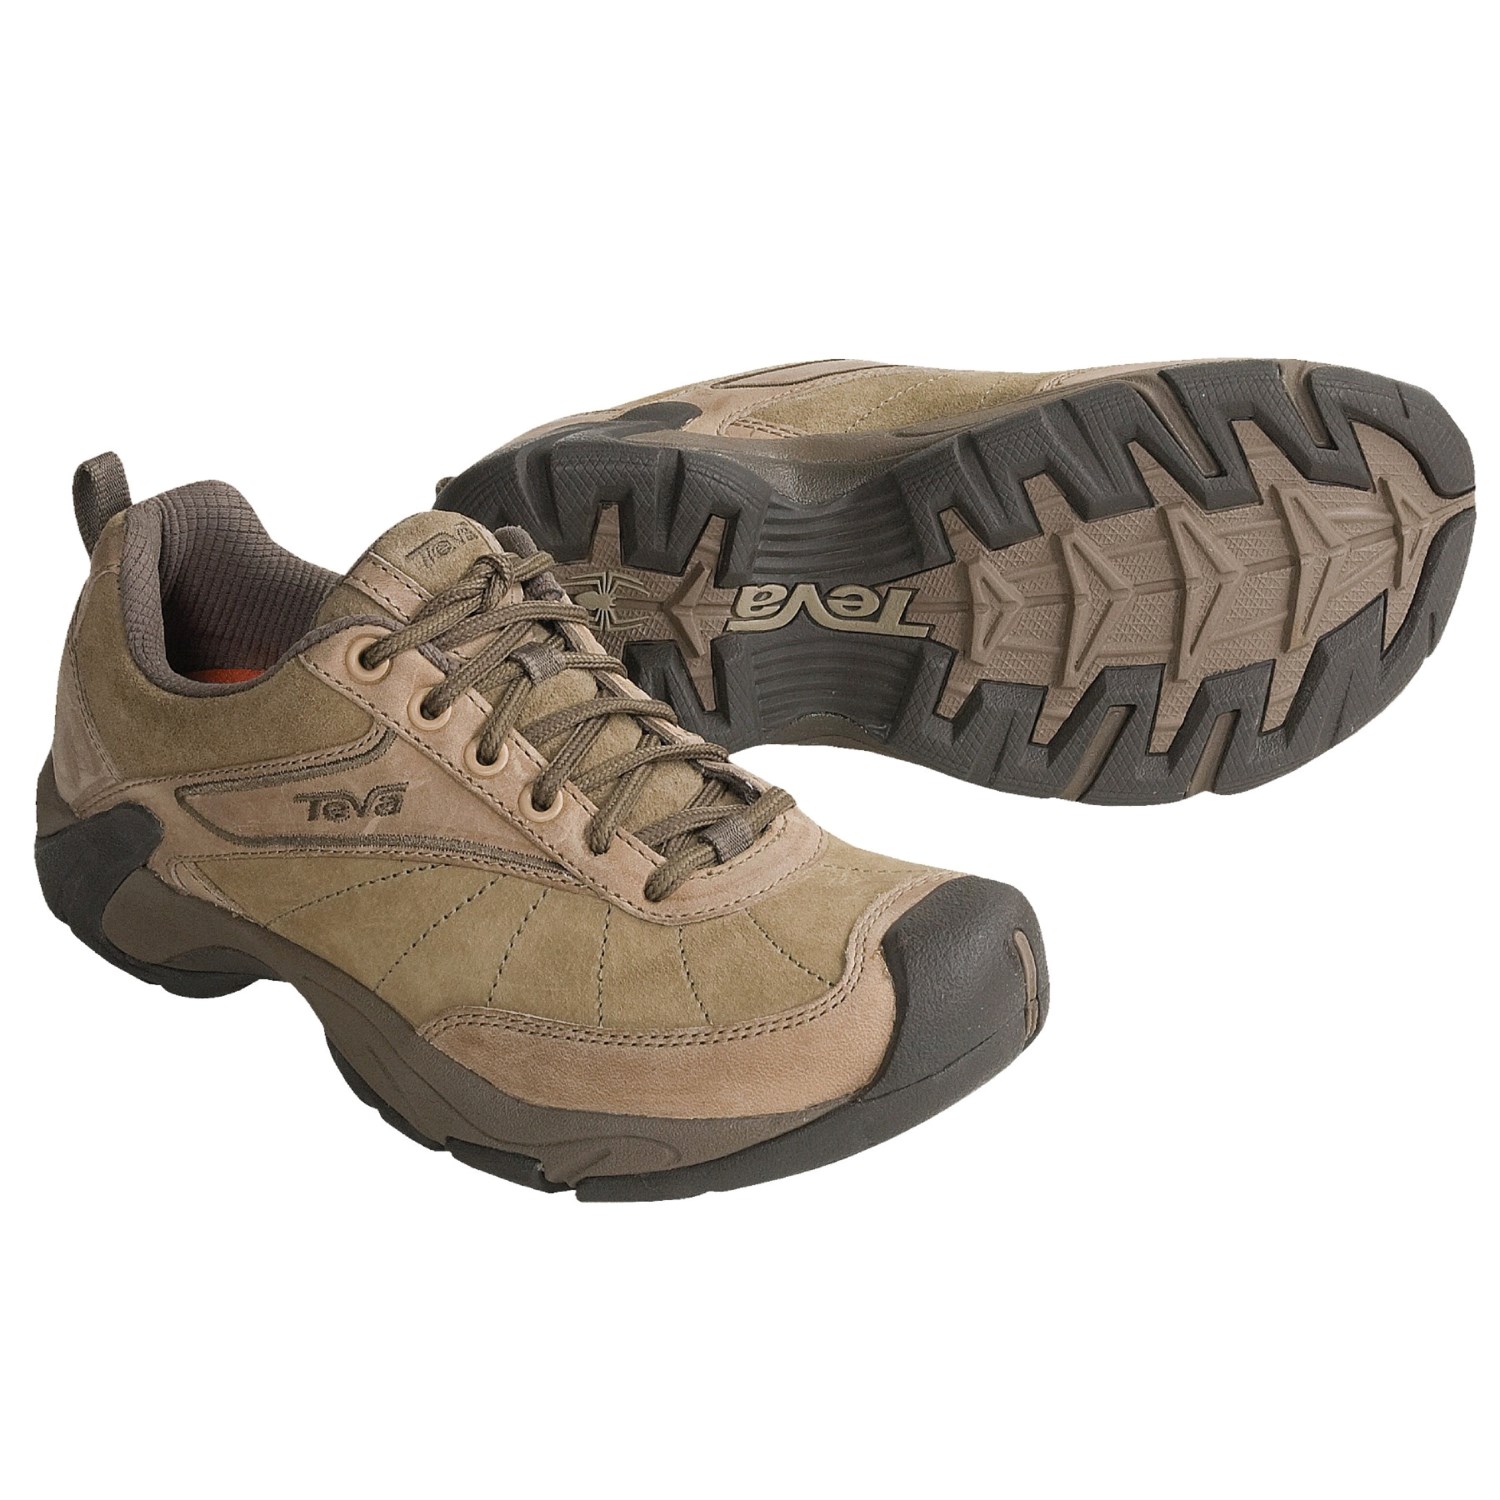 Teva Tamur Leather Hiking Shoes (For Women) 1569W - Save 41%